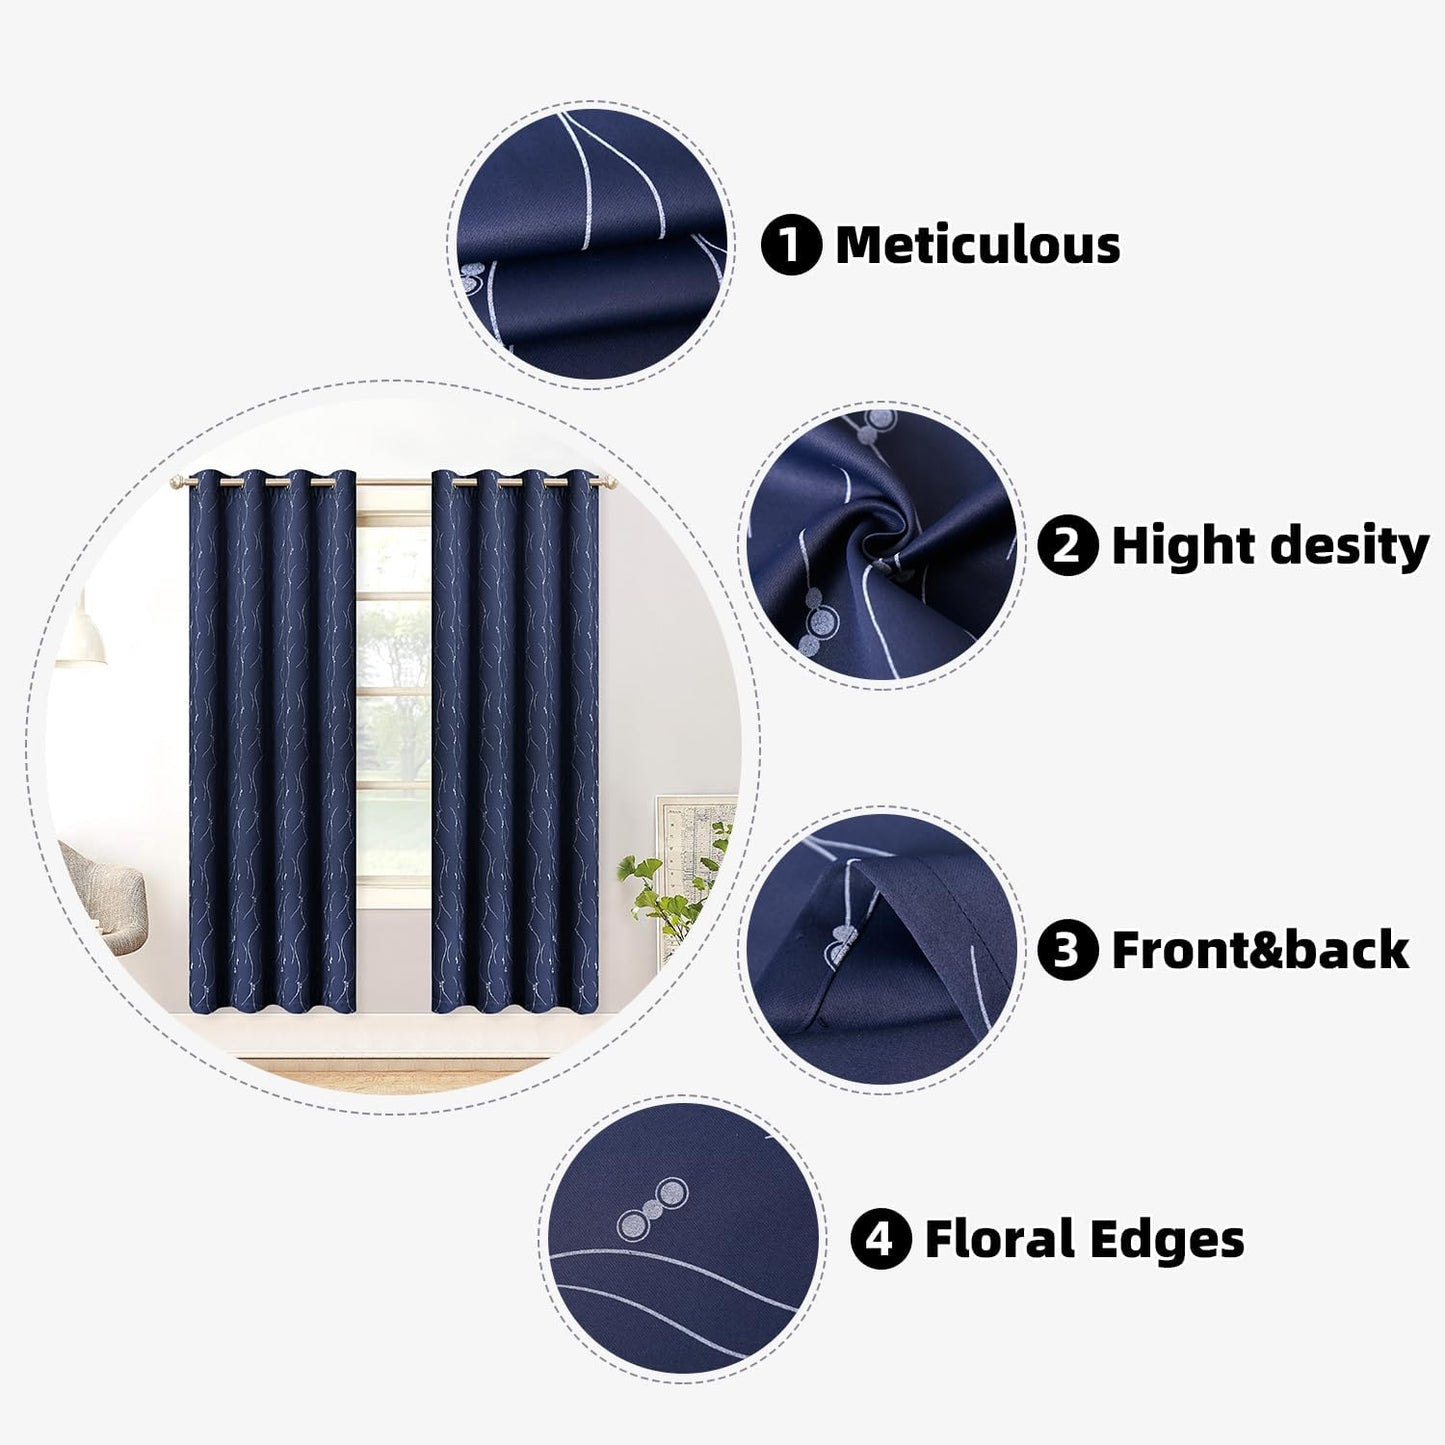 TMLTCOR Blackout Curtains for Bedroom,Bedroom Curtains for Living Room,Room Darkening Curtains 84 Inches Long,Glow in the Dark Navy Blue Curtains for Kids Bedroom,52 Inches Wide,2 Panels,Curve  TMLTCOR   